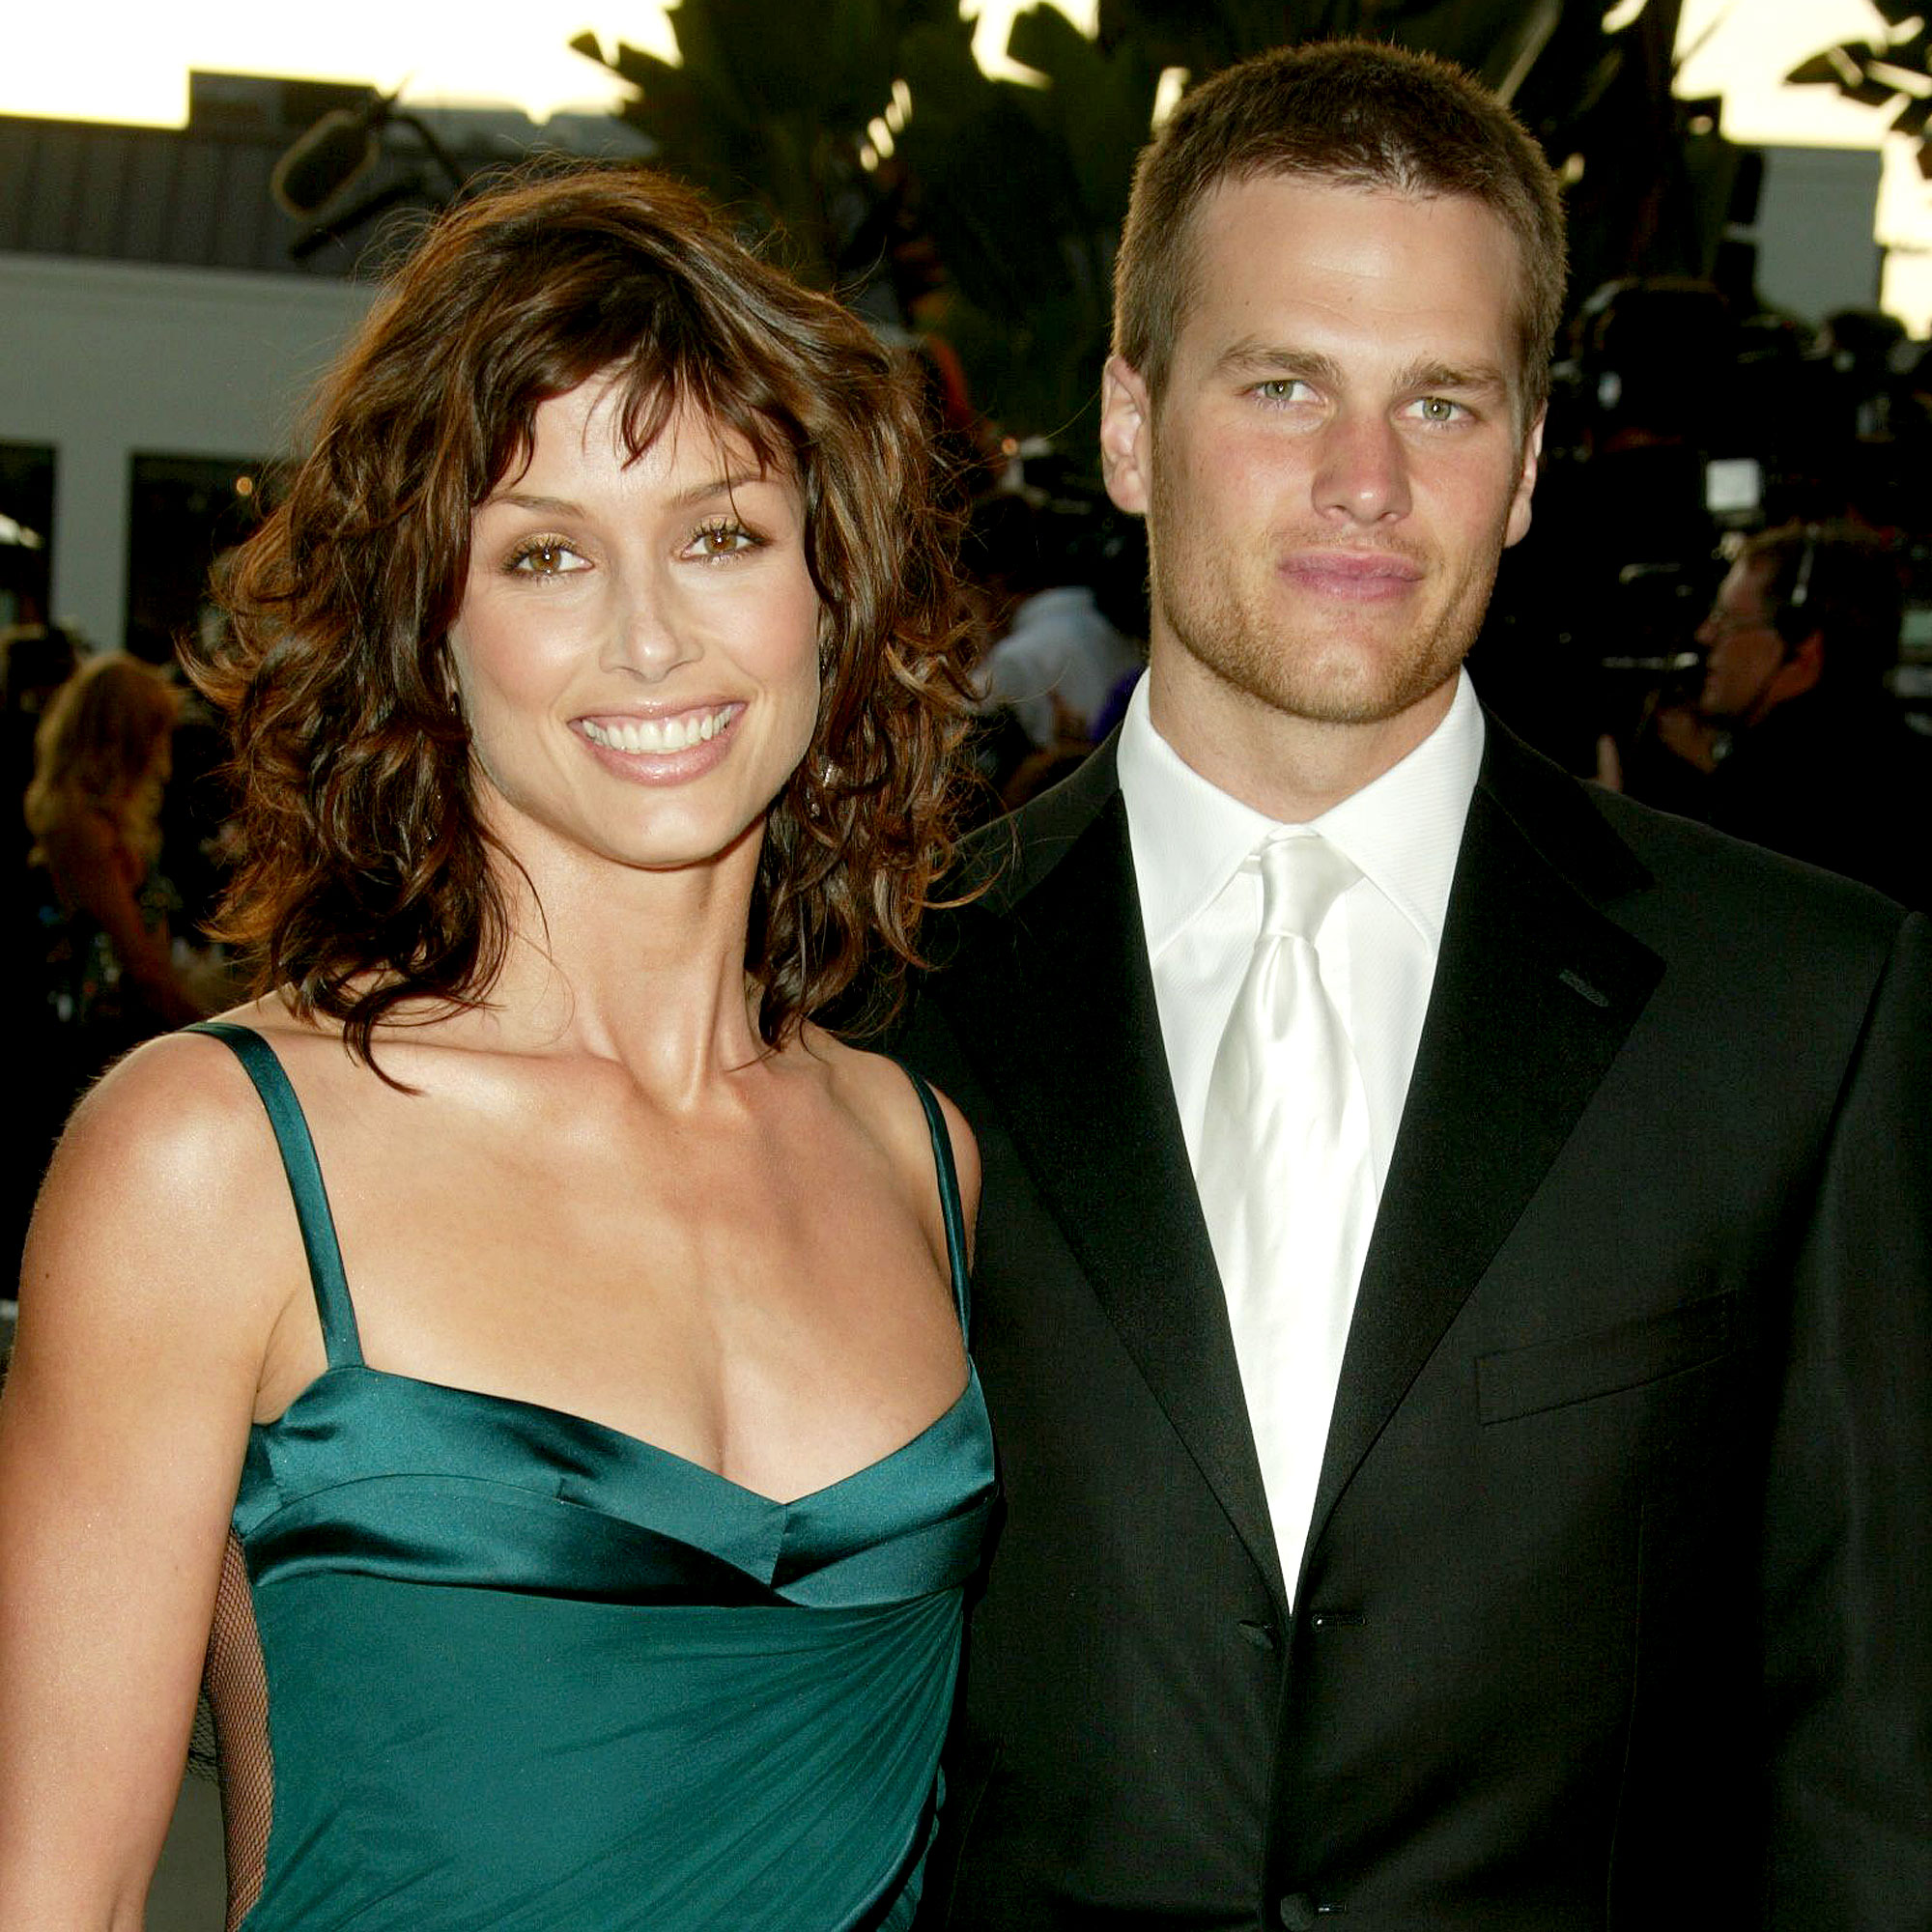 Bridget Moynahans Quotes About Her Relationship With Ex Tom Brady Us Weekly 7011